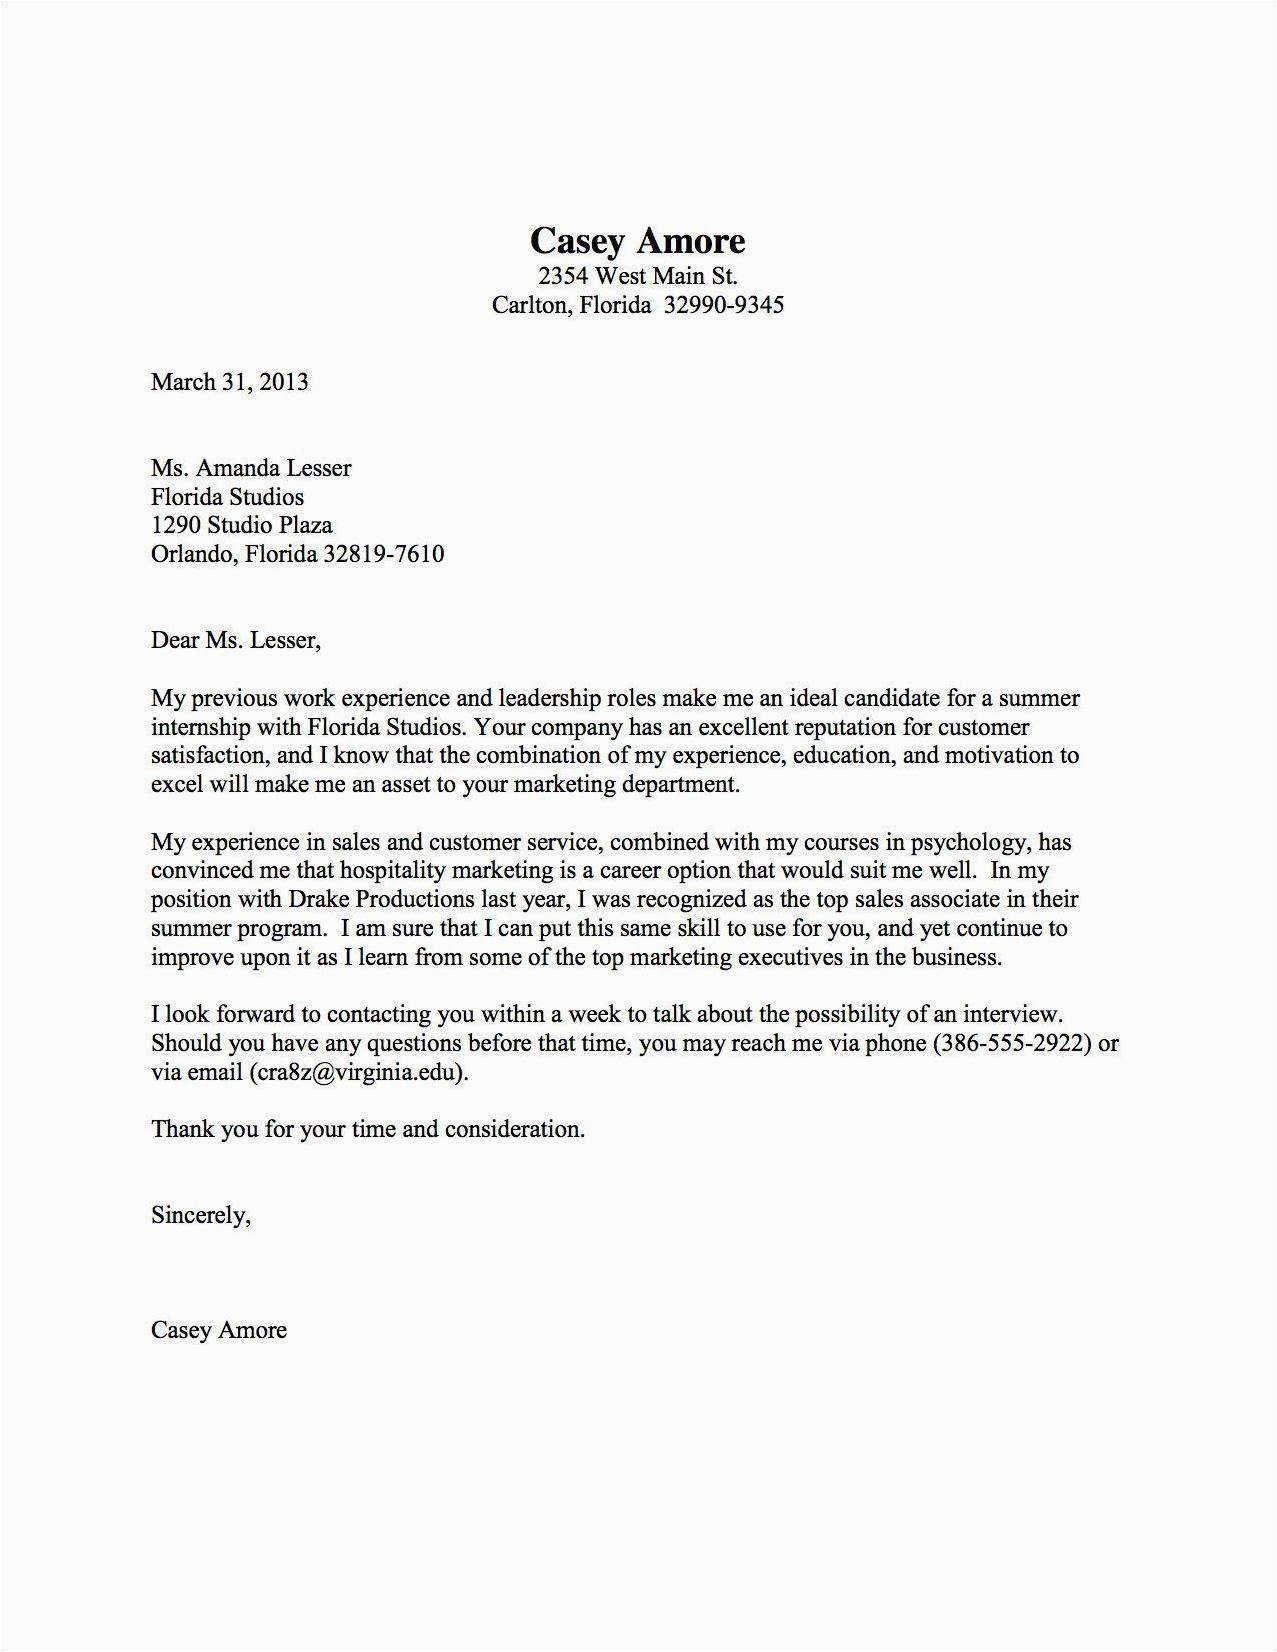 Samples Of Cover Letter for My Resume 10 Resume Cover Letter Examples Pdf